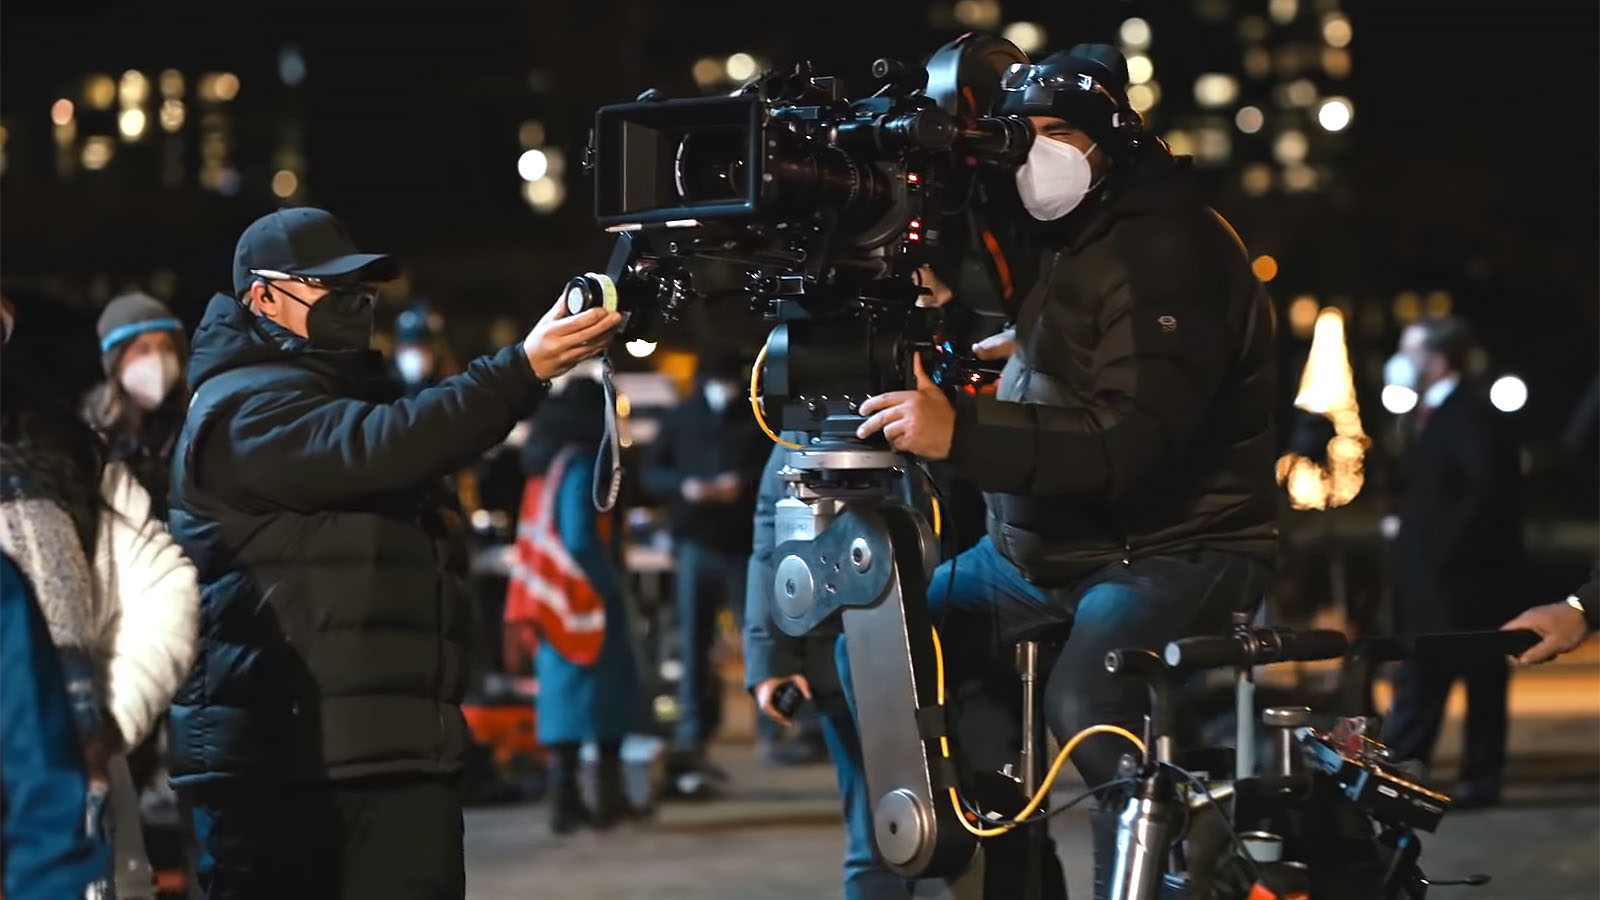 Focus puller and camera operator on set for Don’t Look Up. Image © Netflix